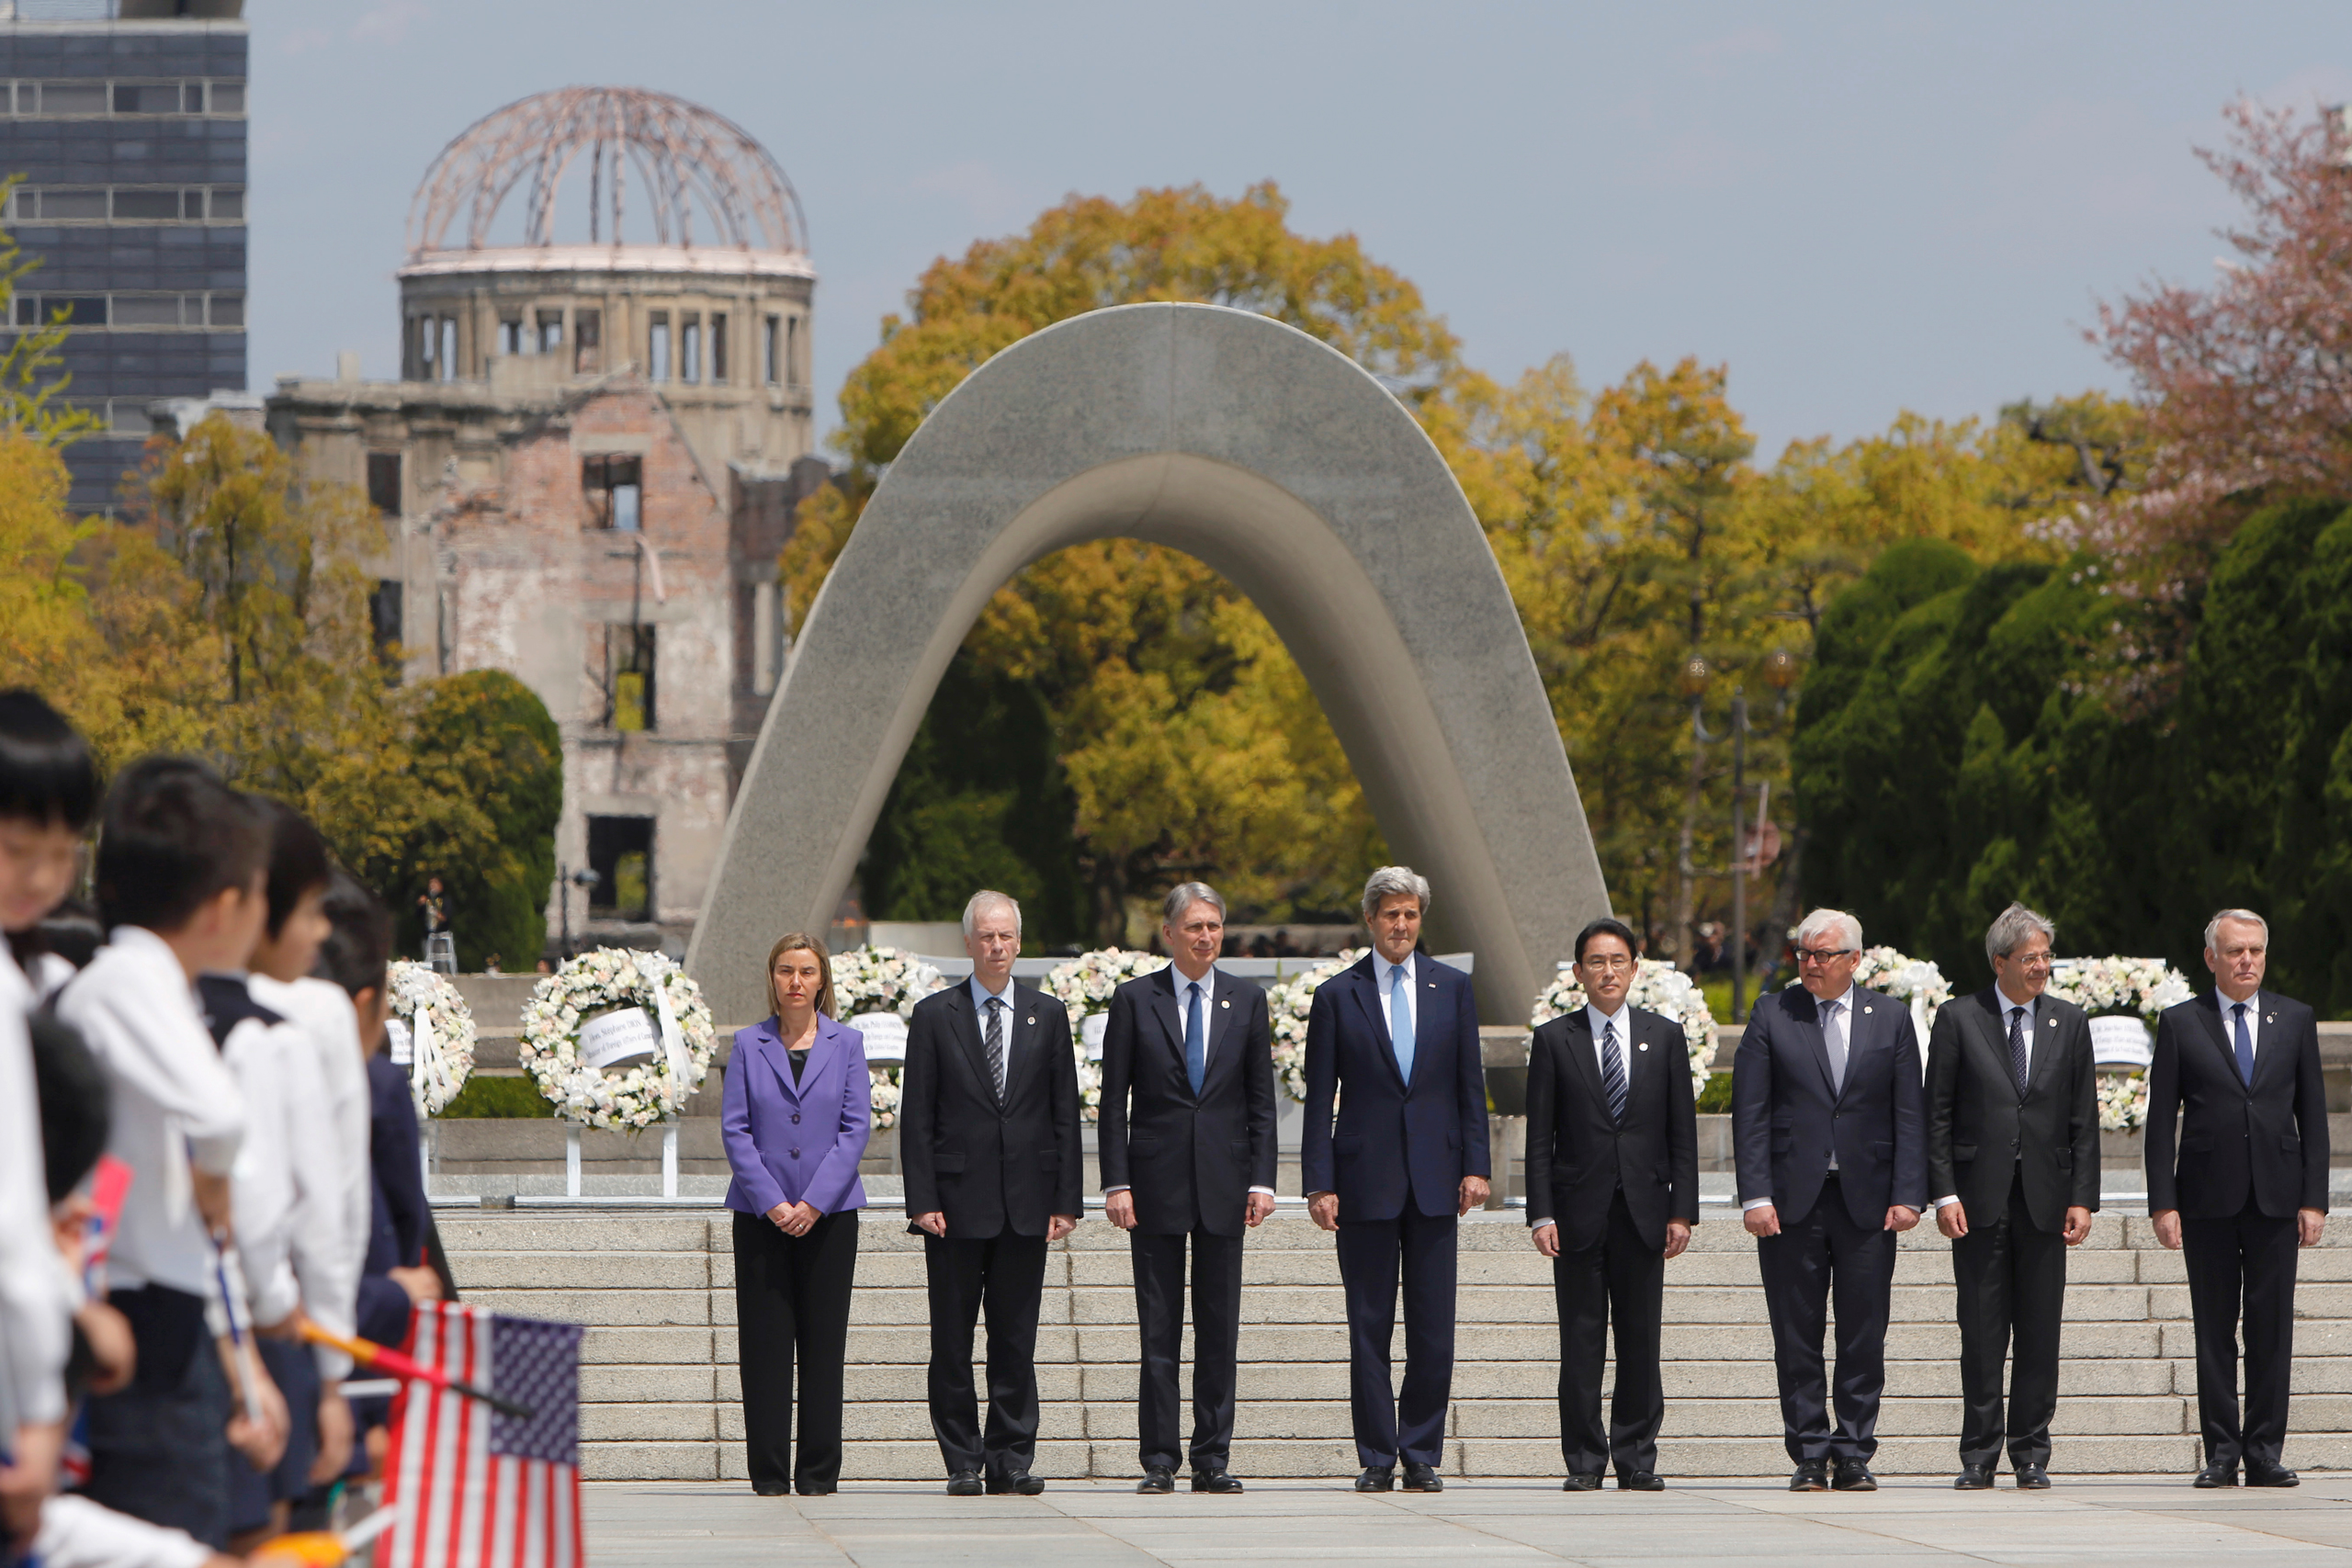 G7 foreign ministers stand together after placing wreaths at the cenotaph at Hiroshima Peace Memorial Park in Hiroshima, western Japan on April 11, 2016. Pictured from left are E.U. High Representative for Foreign Affairs Federica Mogherini, Canada's Foreign Minister Stephane Dion, Britain's Foreign Minister Philip Hammond, U.S. Secretary of State John Kerry, Japan's Foreign Minister Fumio Kishida, Germany's Foreign Minister Frank-Walter Steinmeier, Italy's Foreign Minister Paolo Gentiloni and France's Foreign Minister Jean-Marc Ayrault. (Jonathan Ernst—Press Pool/AP)